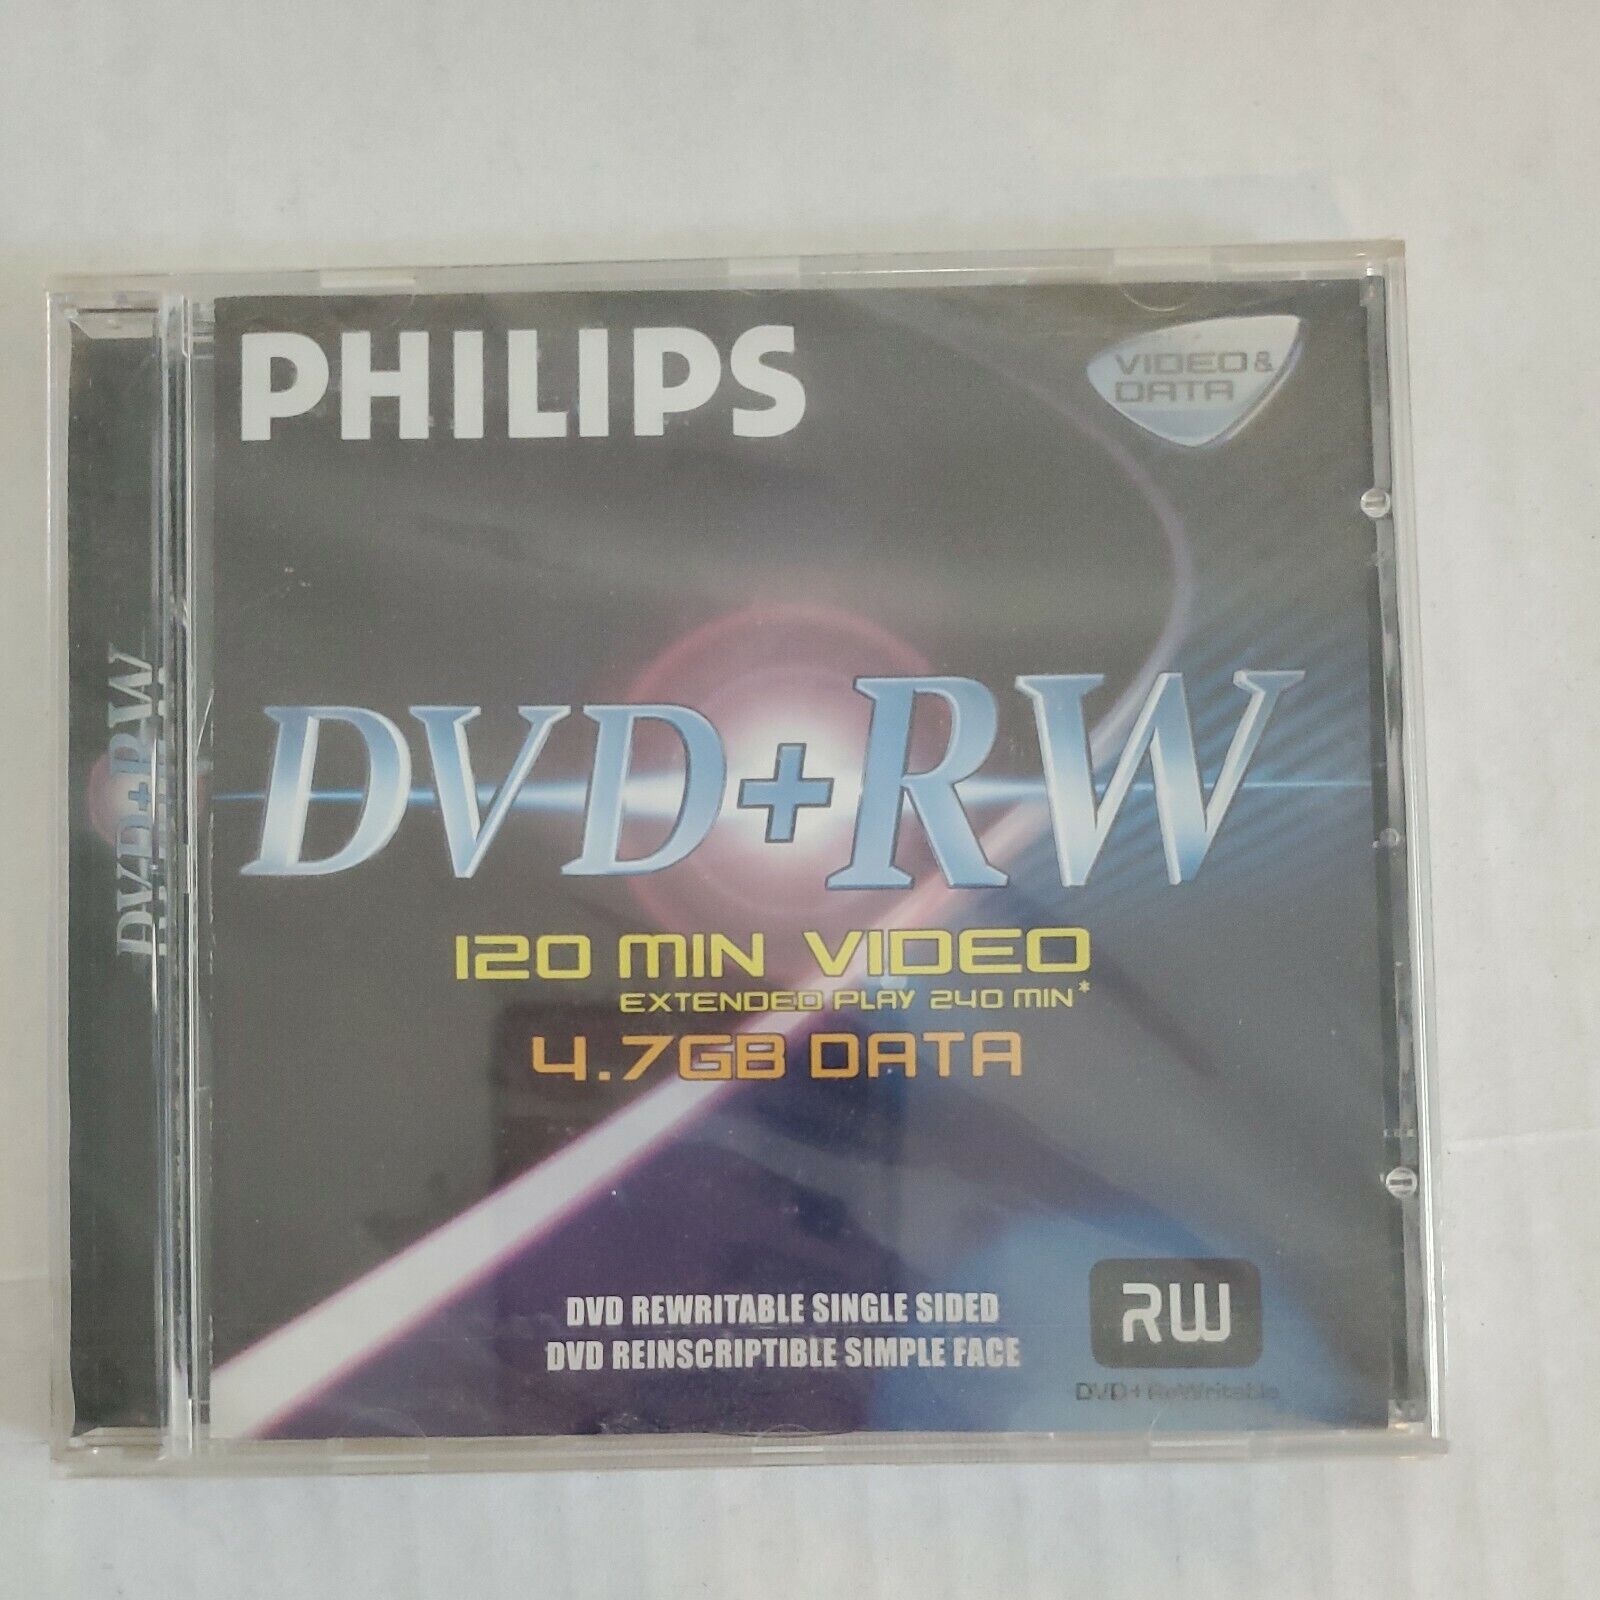 Philips Magnavox 4.7GB DVD-RW  Factory Sealed 🦭12 Min Video extend UNOPENED 